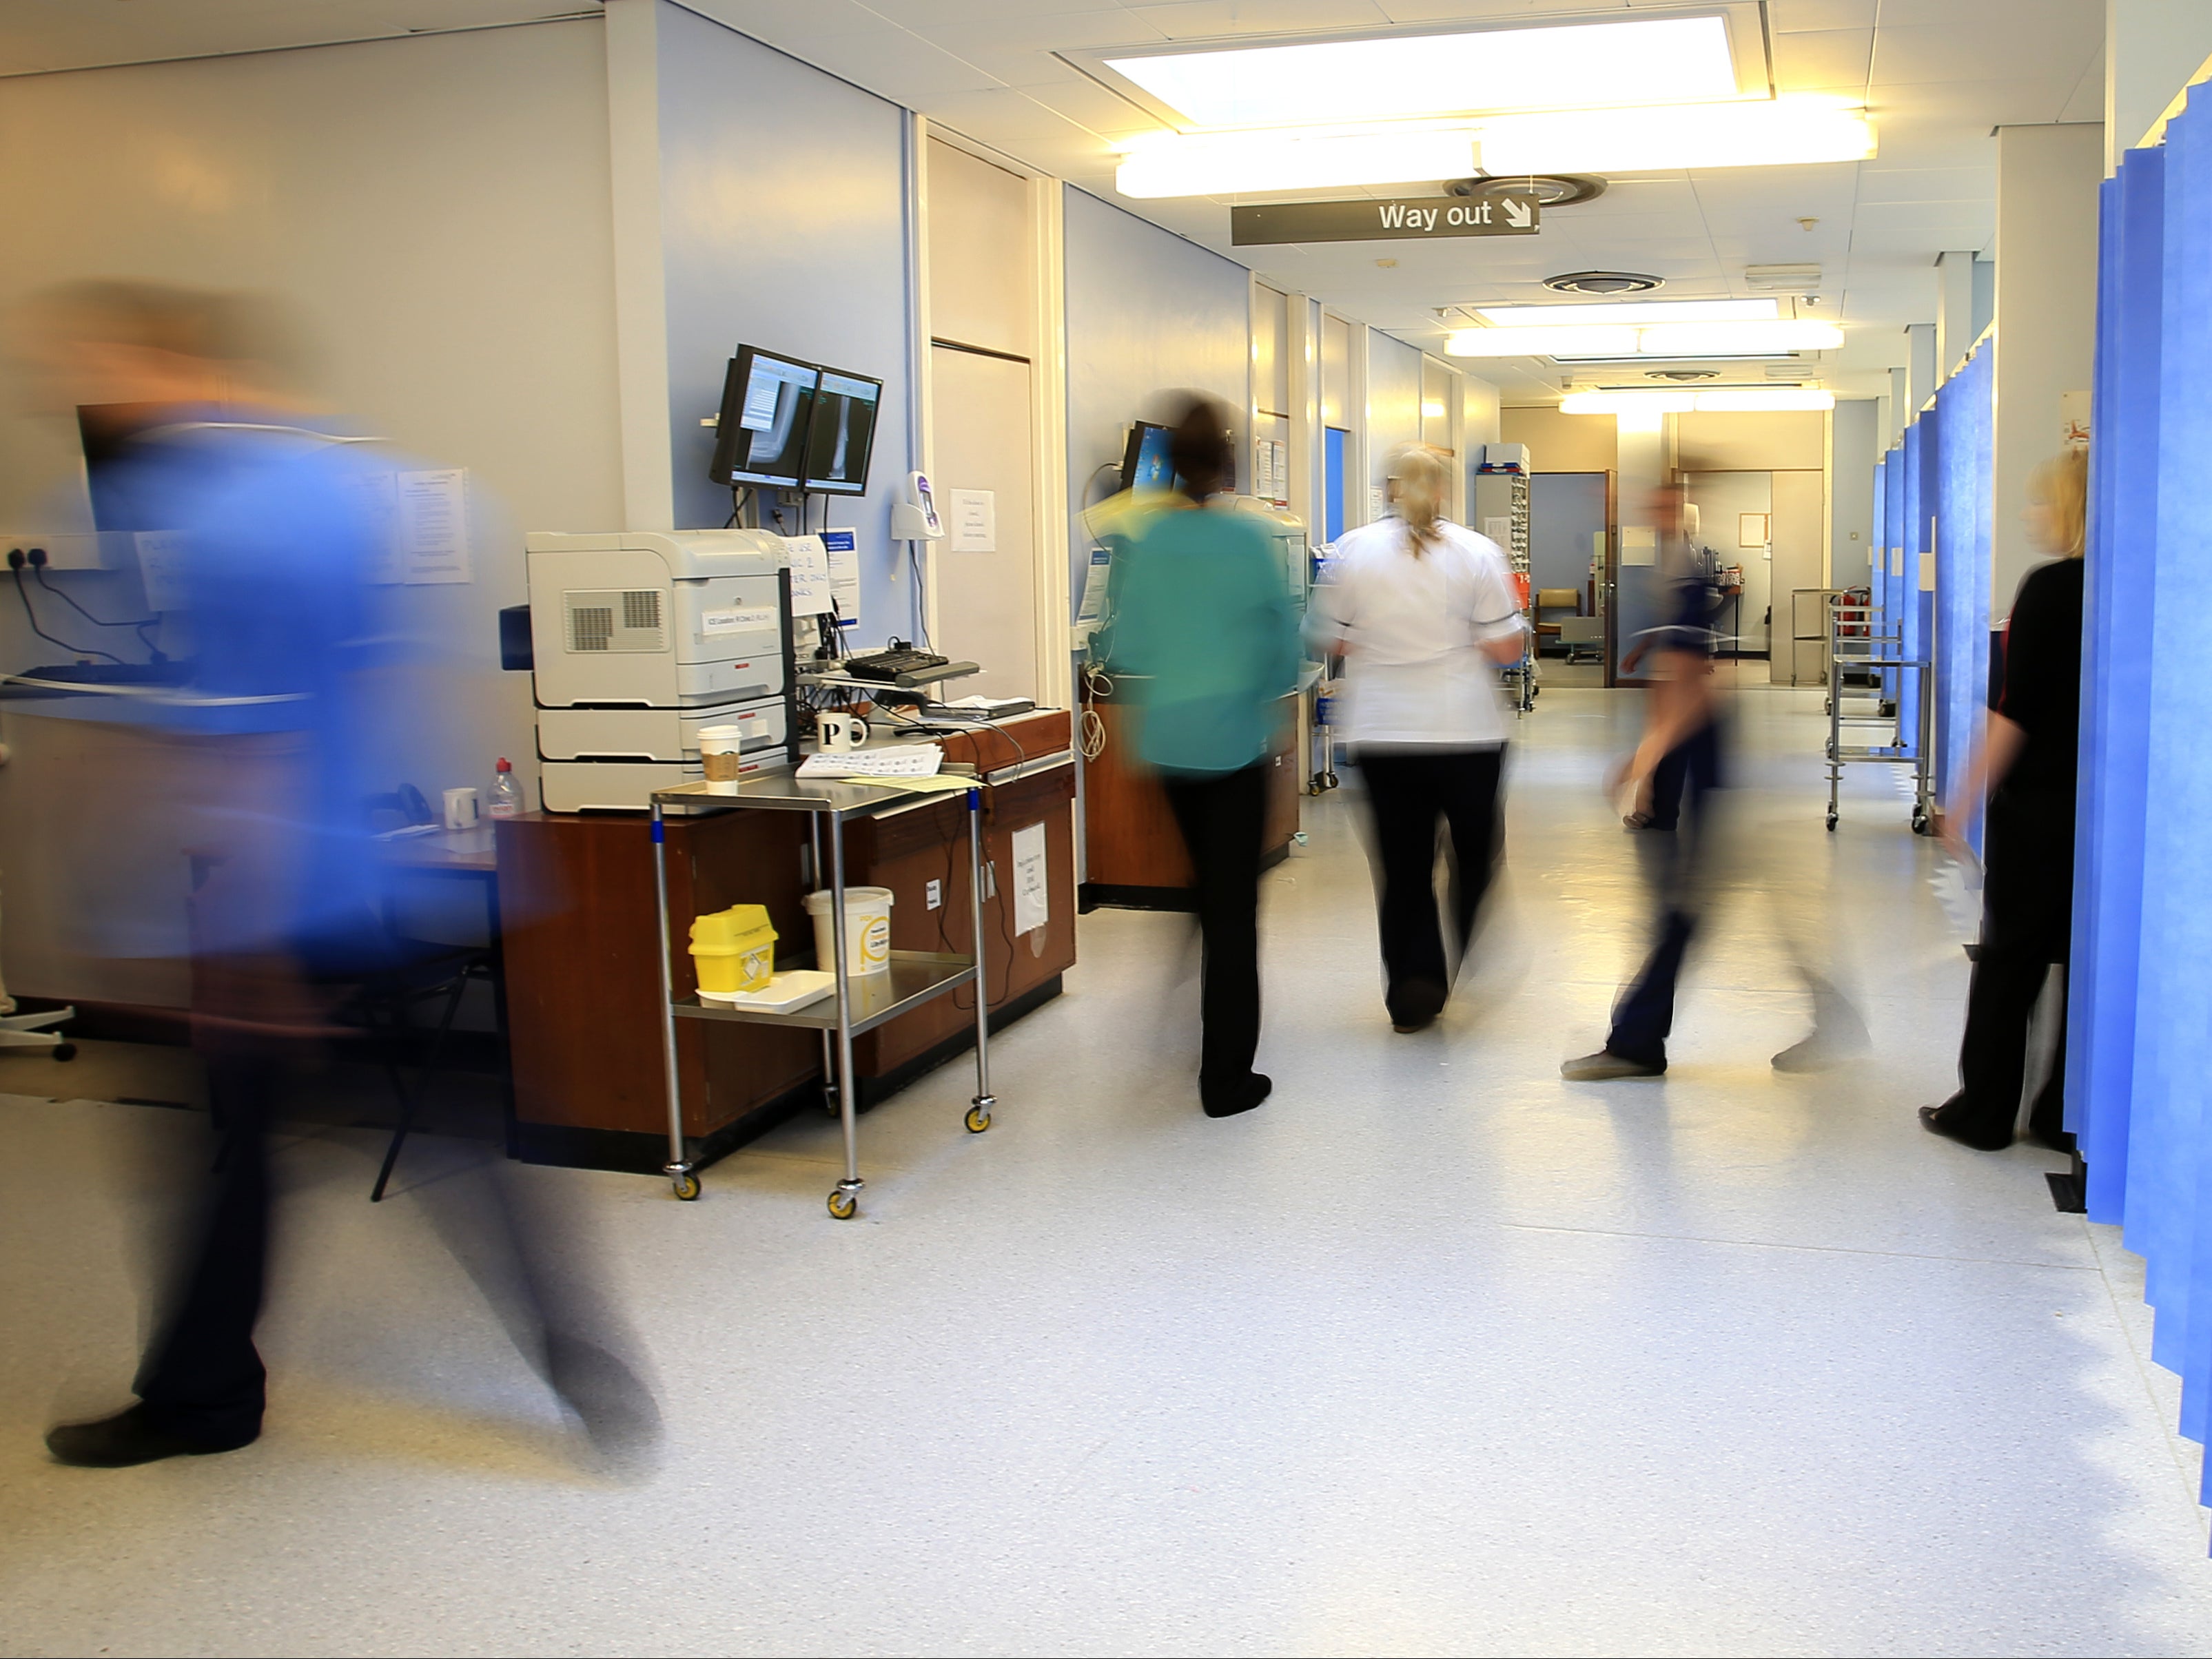 Ministers are planning the biggest reforms to the NHS in almost a decade